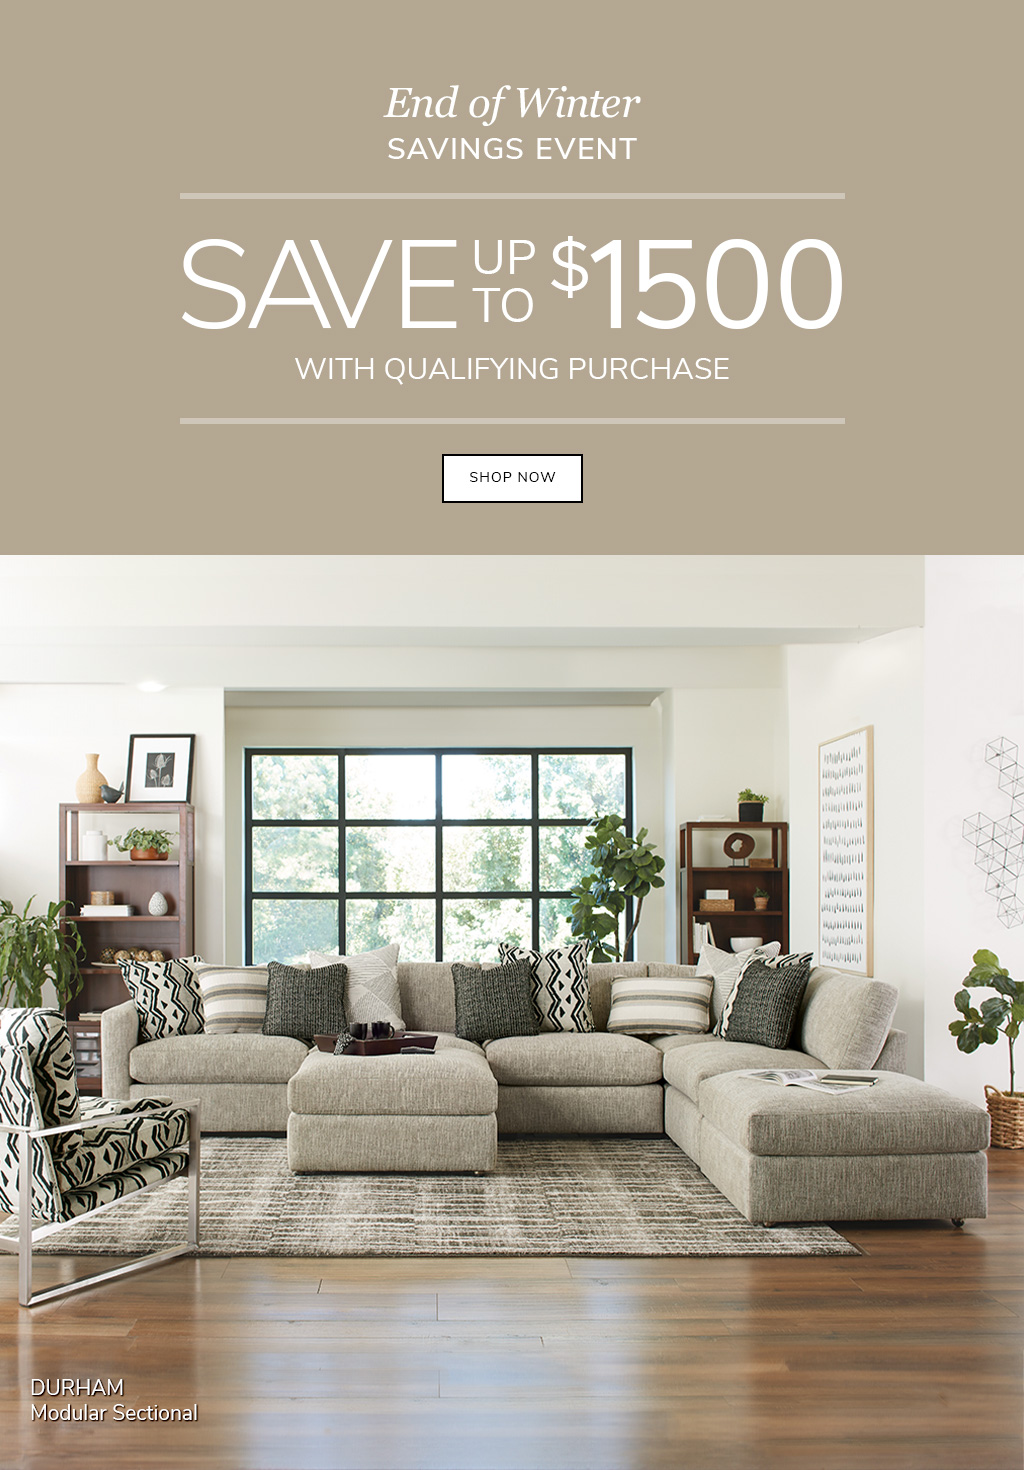 Save up to $1500 with Qualifying Purchase from Bernie & Phyl's Furniture